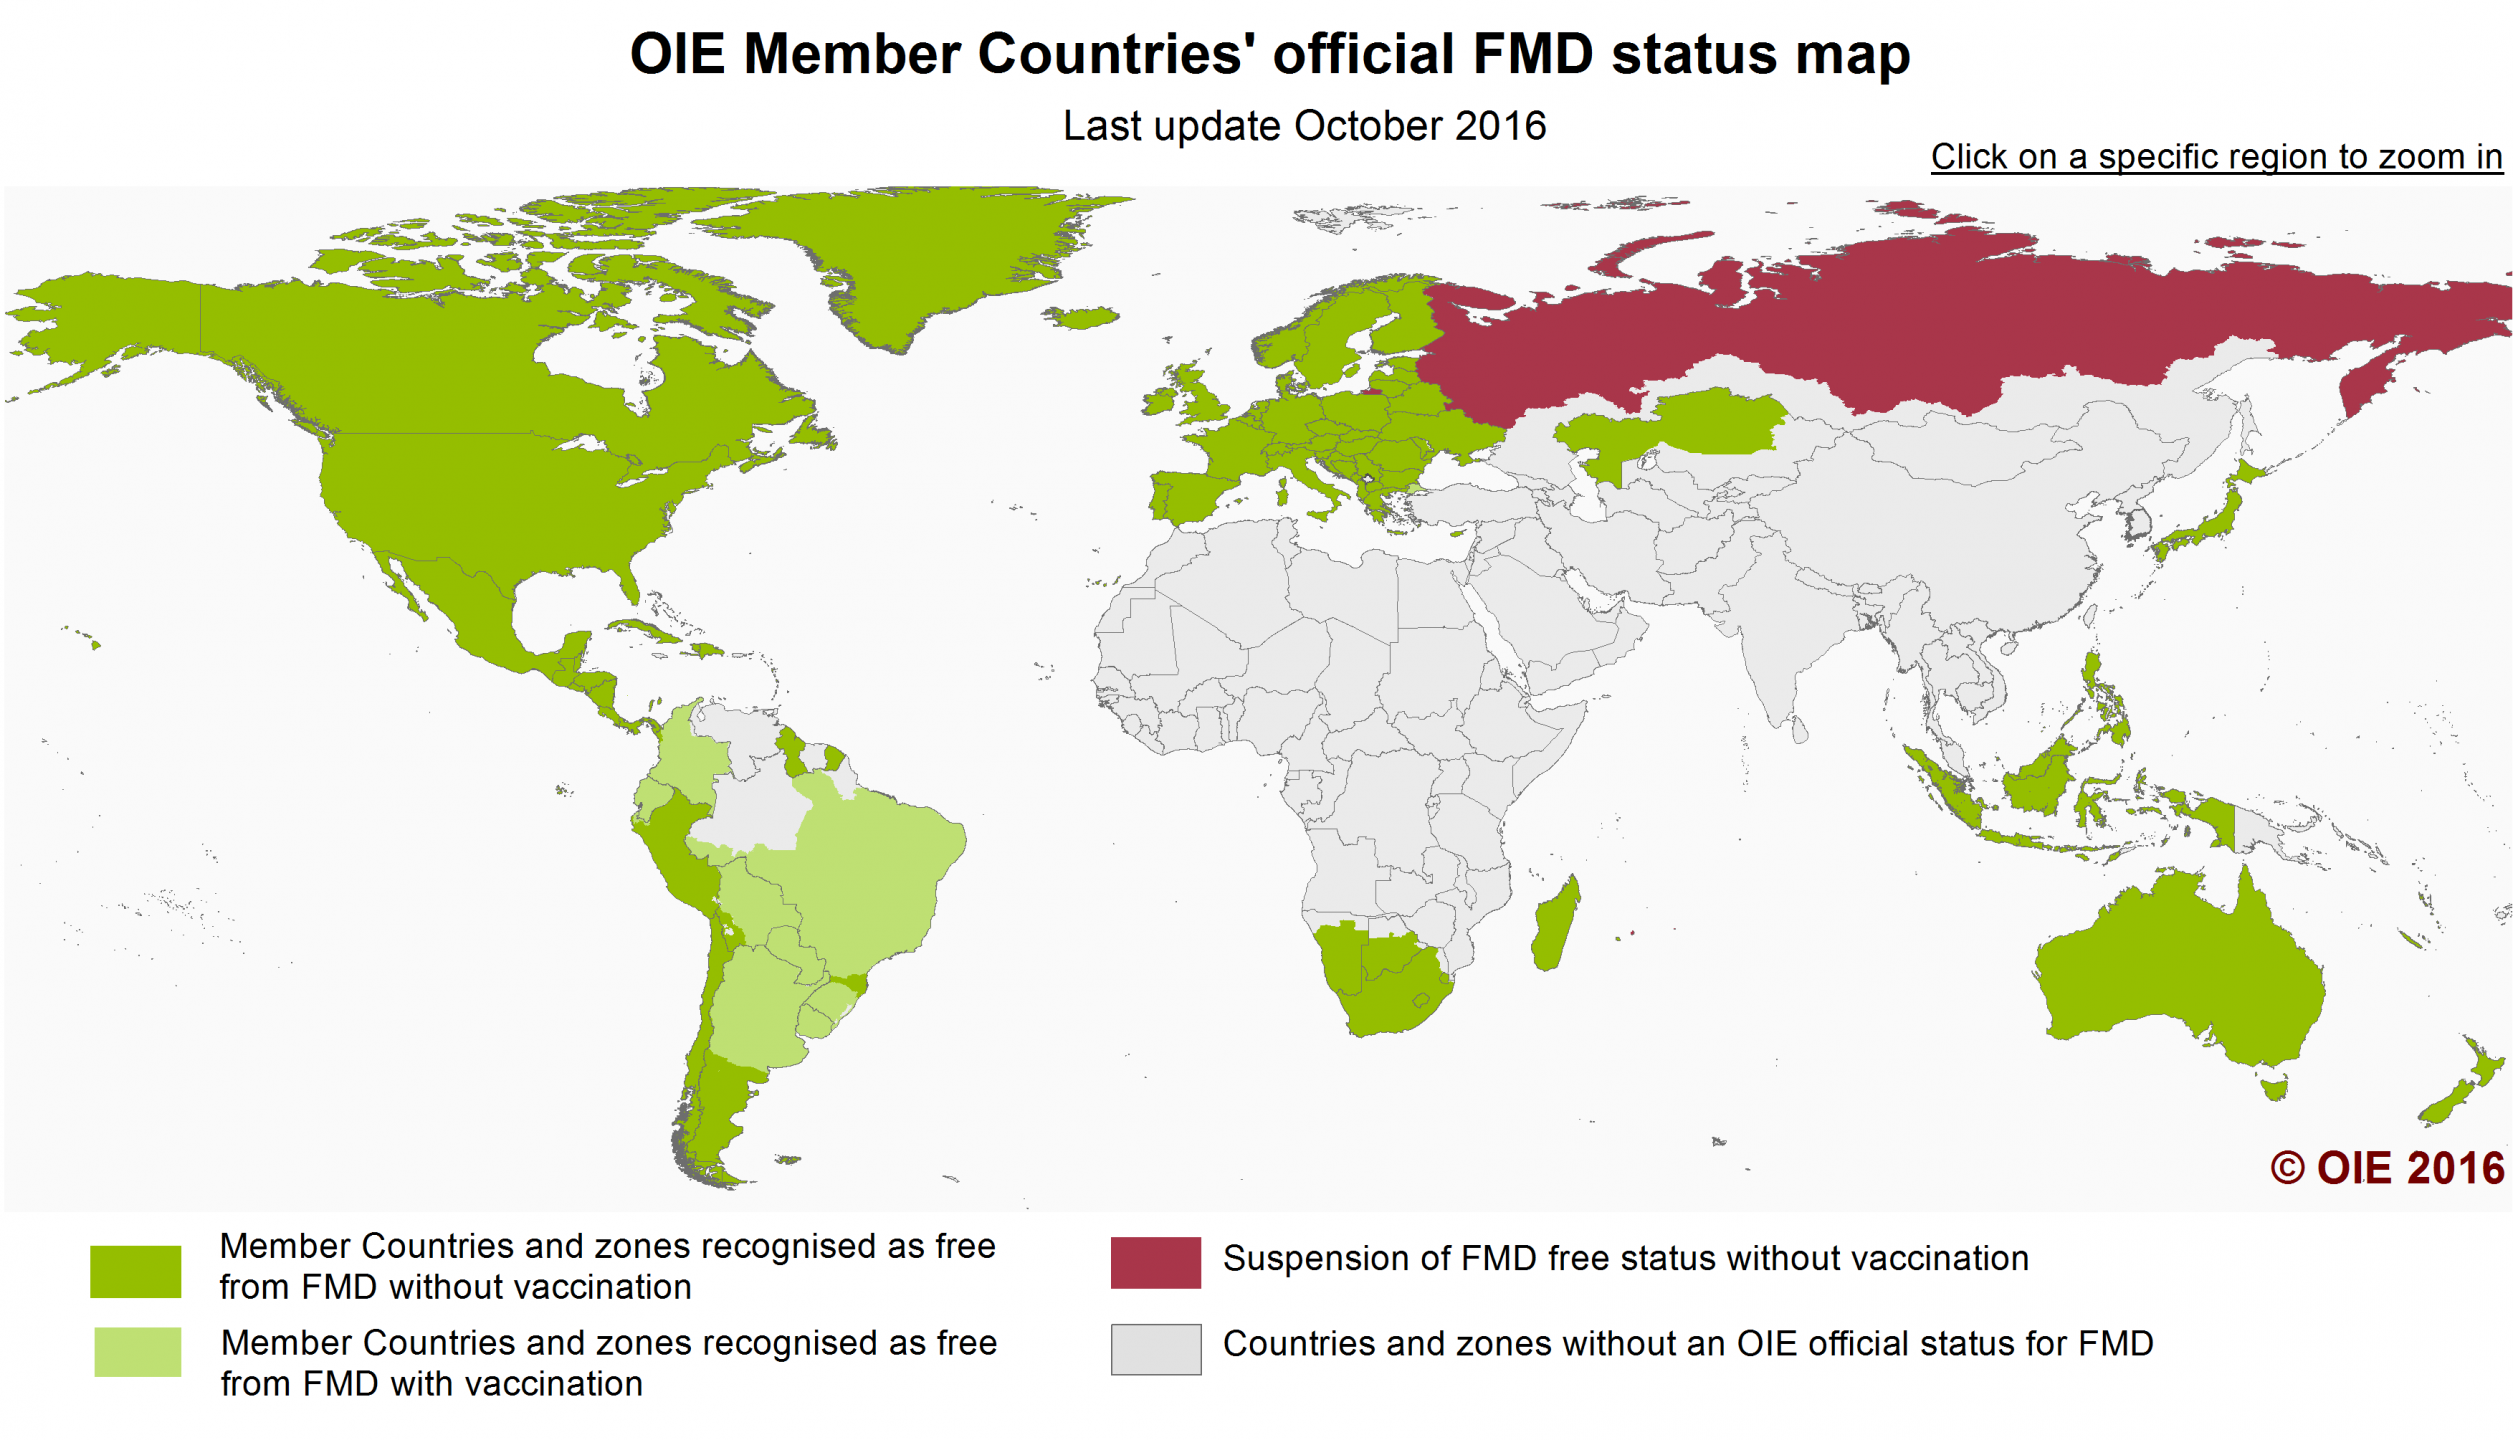 OIE Member Countries' Official FMD Status Map